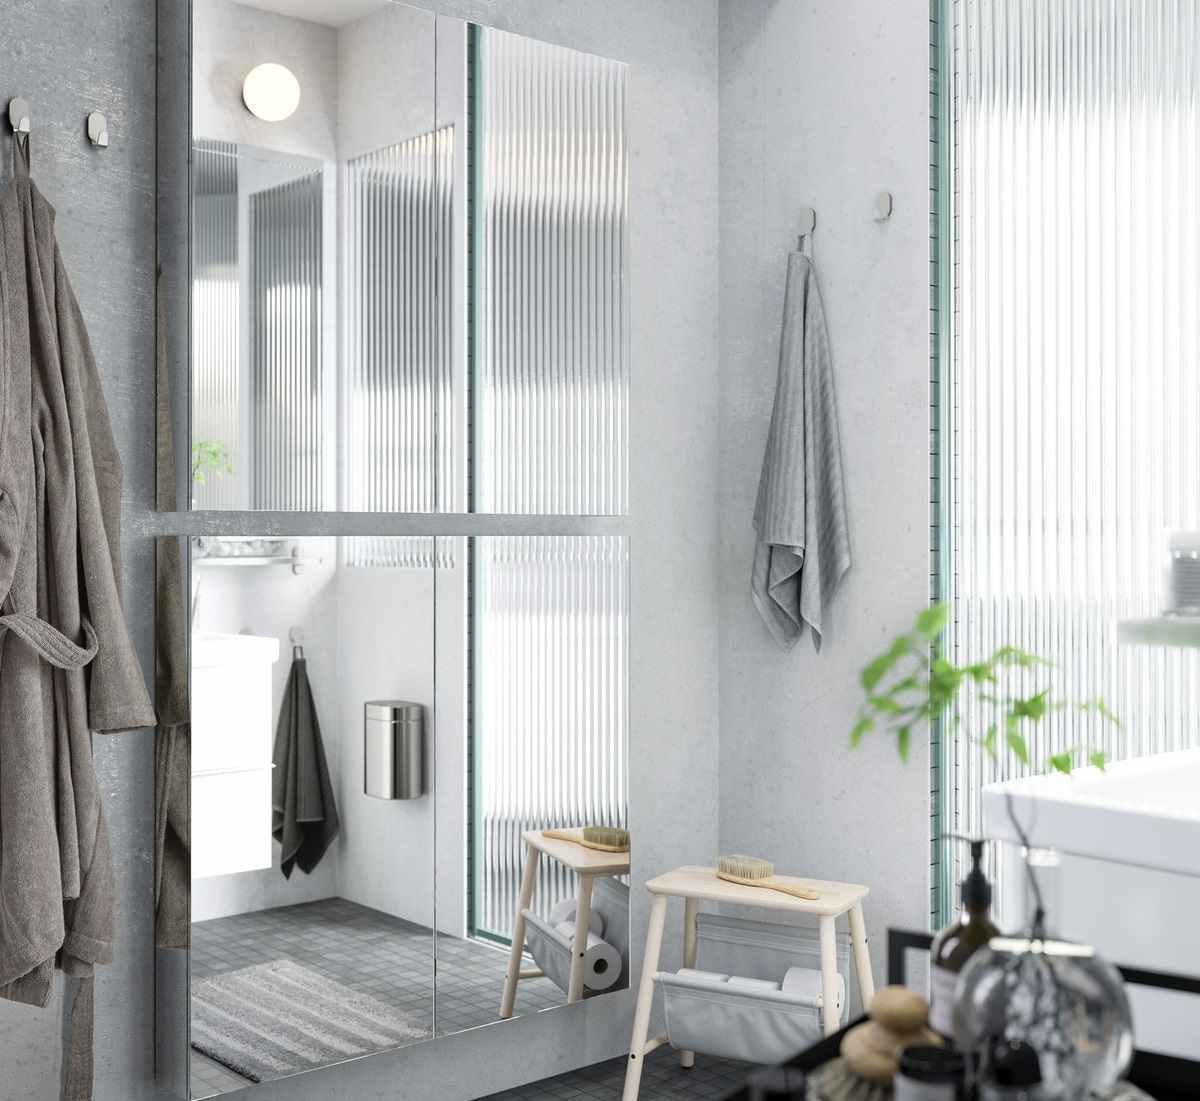 Ikea Bath room featuring textiles in the new Catalog 2020 bath accessories and chairs